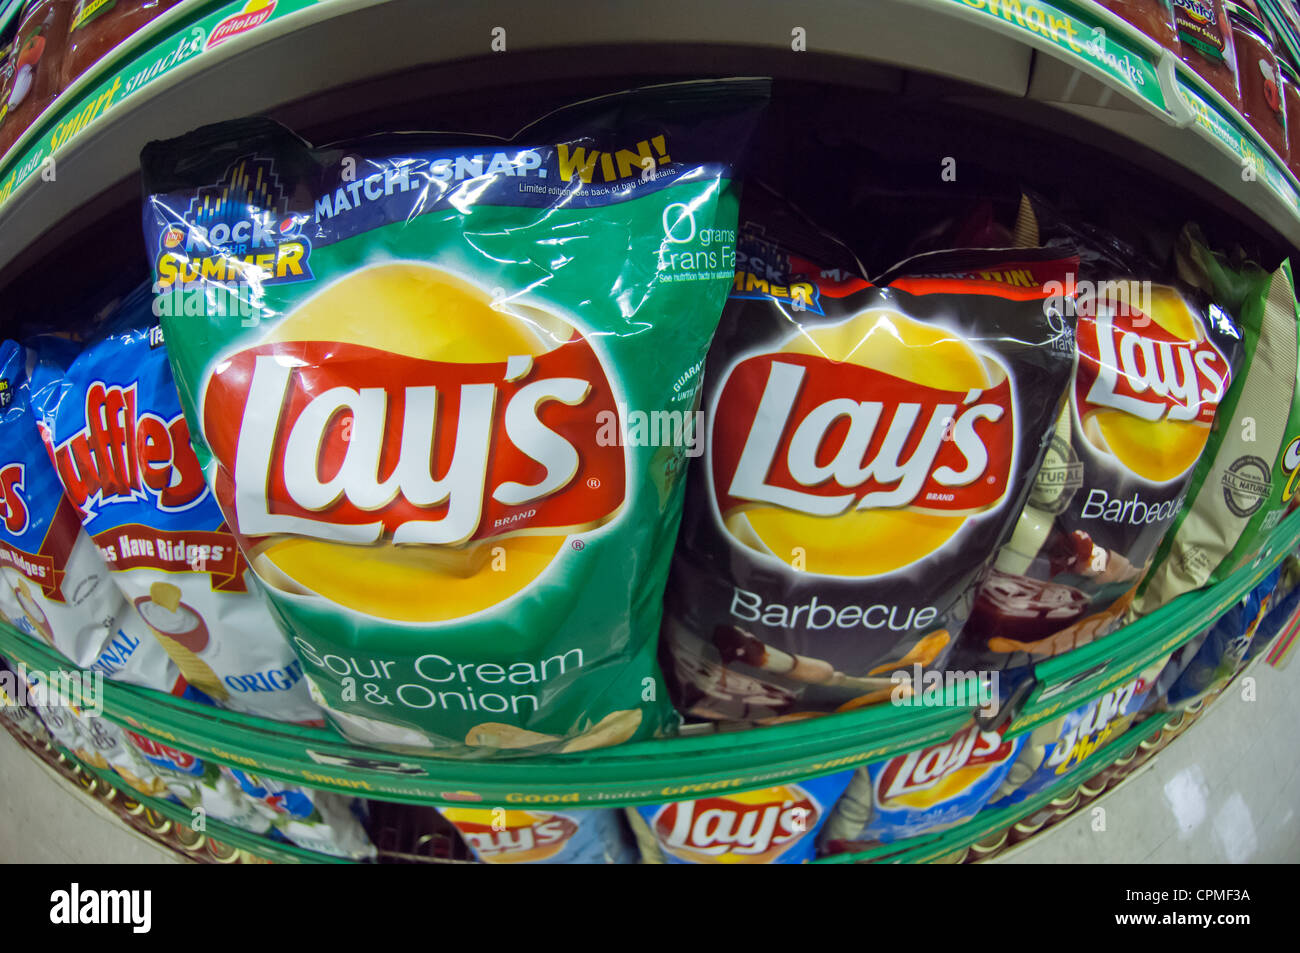 A display of tasty Frito-Lay brand chips in a supermarket in New York on Friday, May 25, 2012. (© Richard B. Levine) Stock Photo